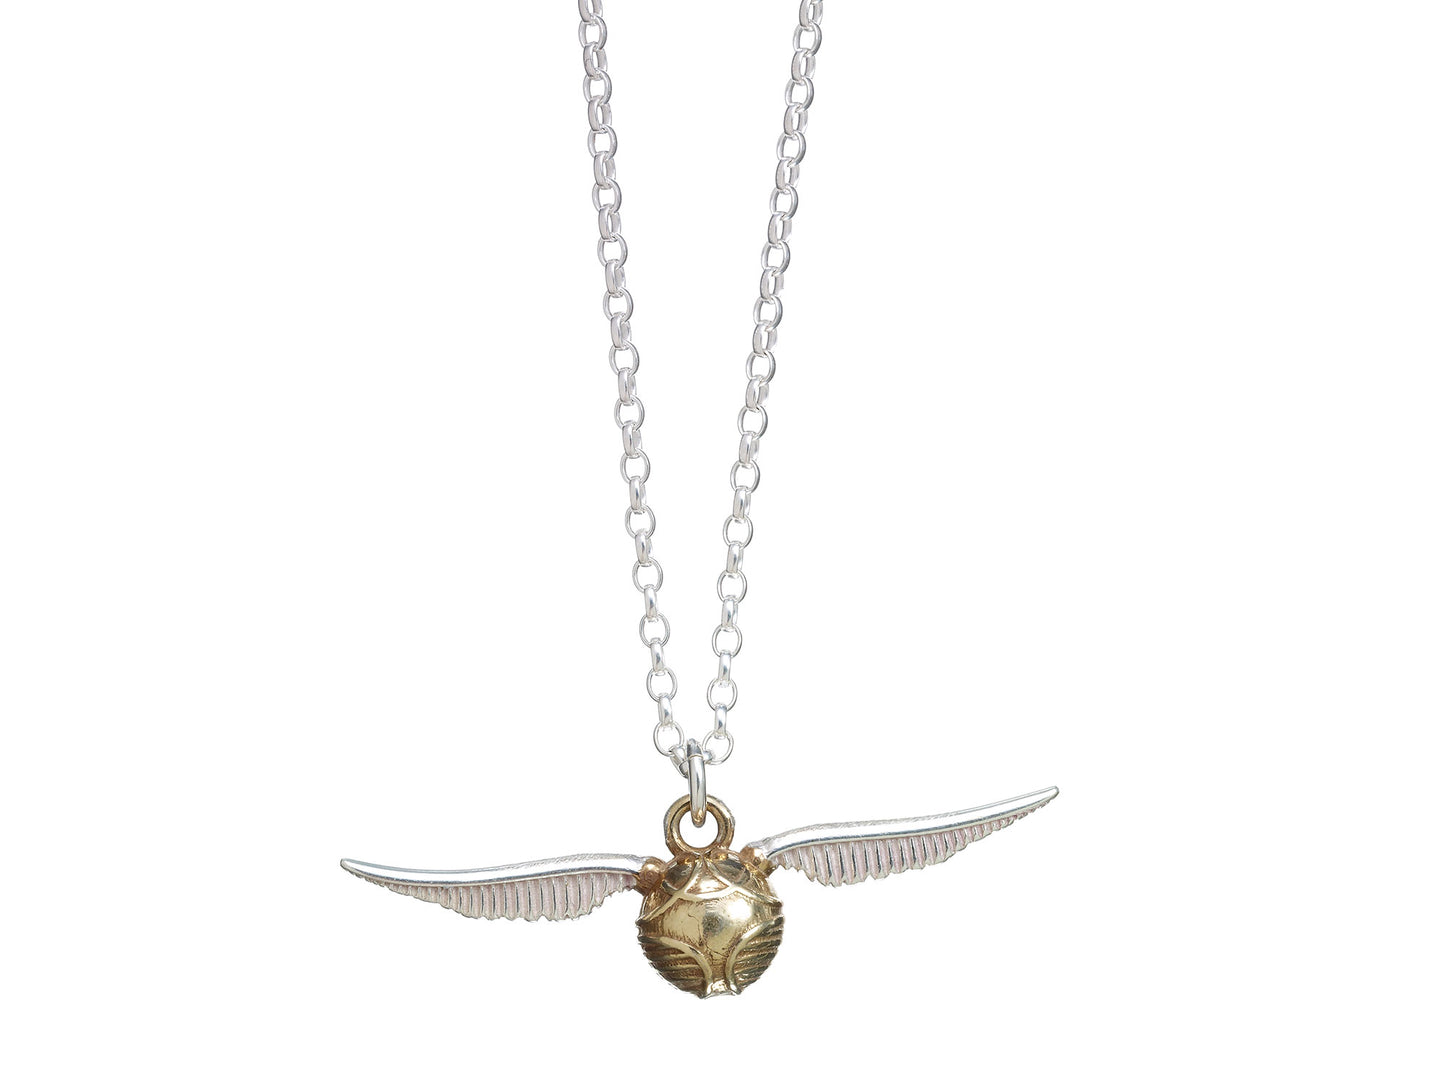 Harry Potter Golden Snitch Charm Necklace in Sterling Silver - Silver